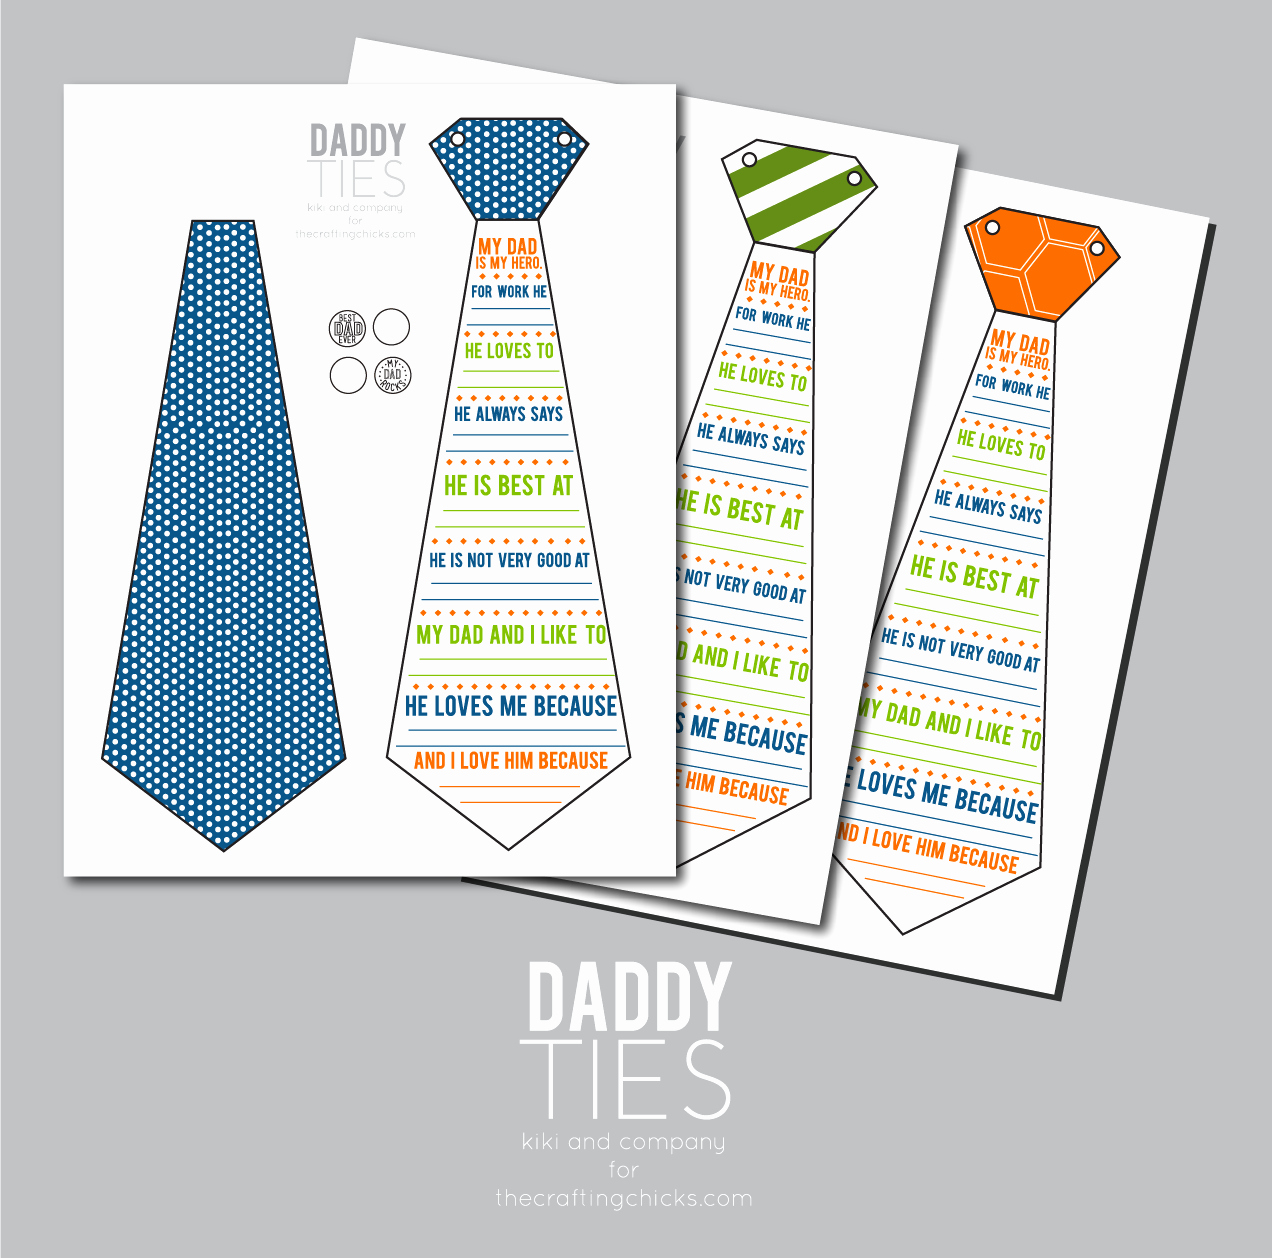 Printable Fathers Day Tie Lovely Daddy Ties Free Father S Day Printable the Crafting Chicks